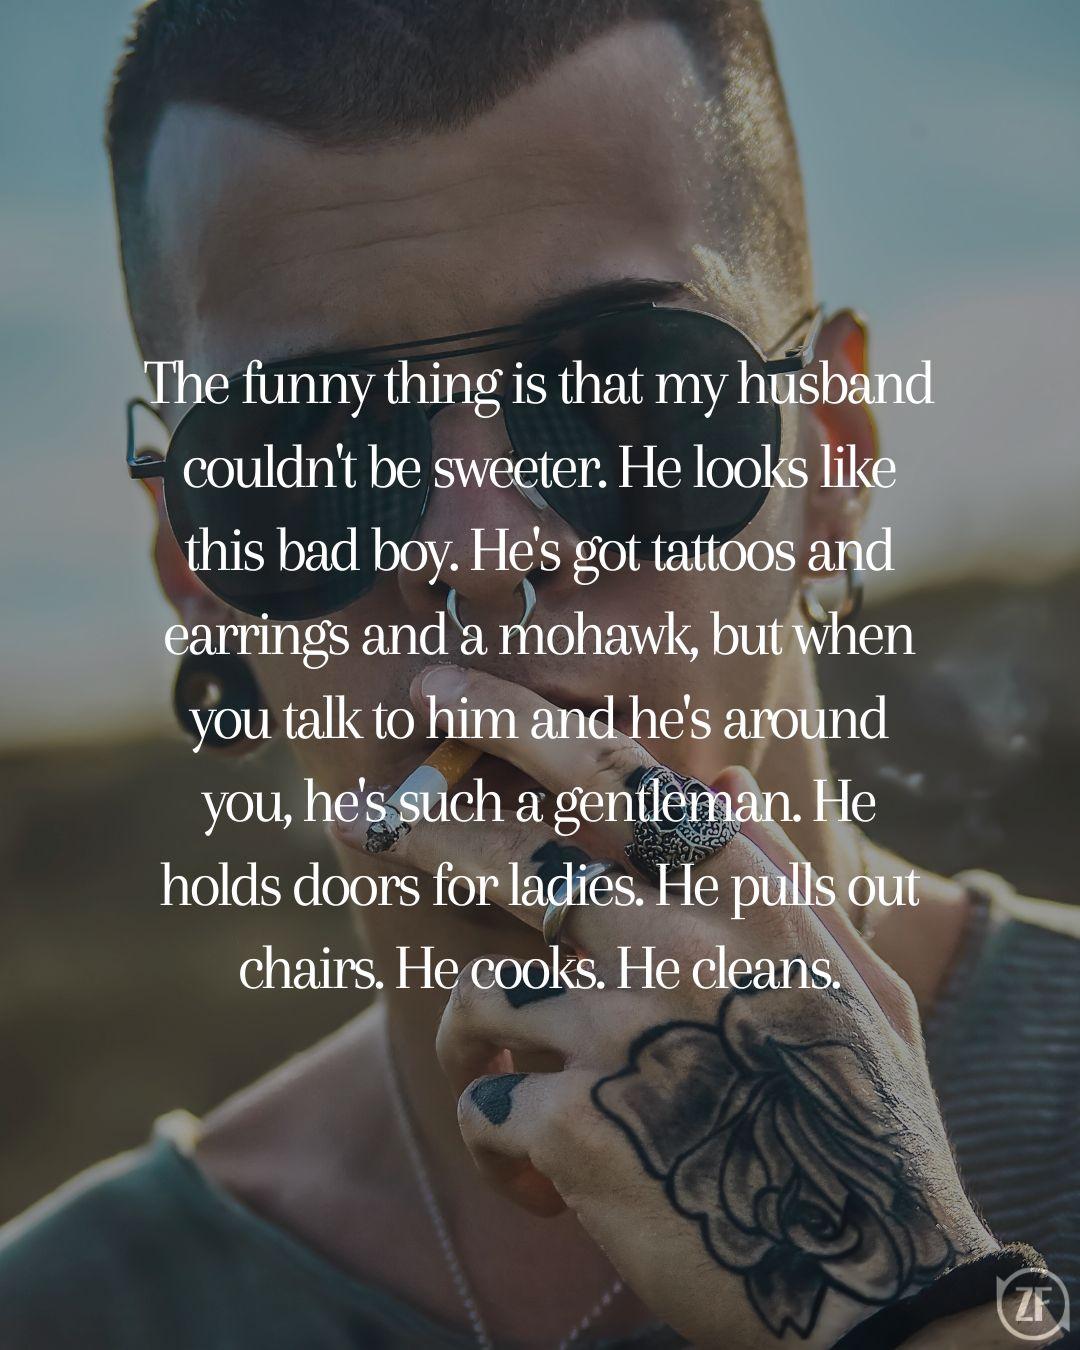 The funny thing is that my husband couldn't be sweeter. He looks like this bad boy. He's got tattoos and earrings and a mohawk, but when you talk to him and he's around you, he's such a gentleman. He holds doors for ladies. He pulls out chairs. He cooks. He cleans.